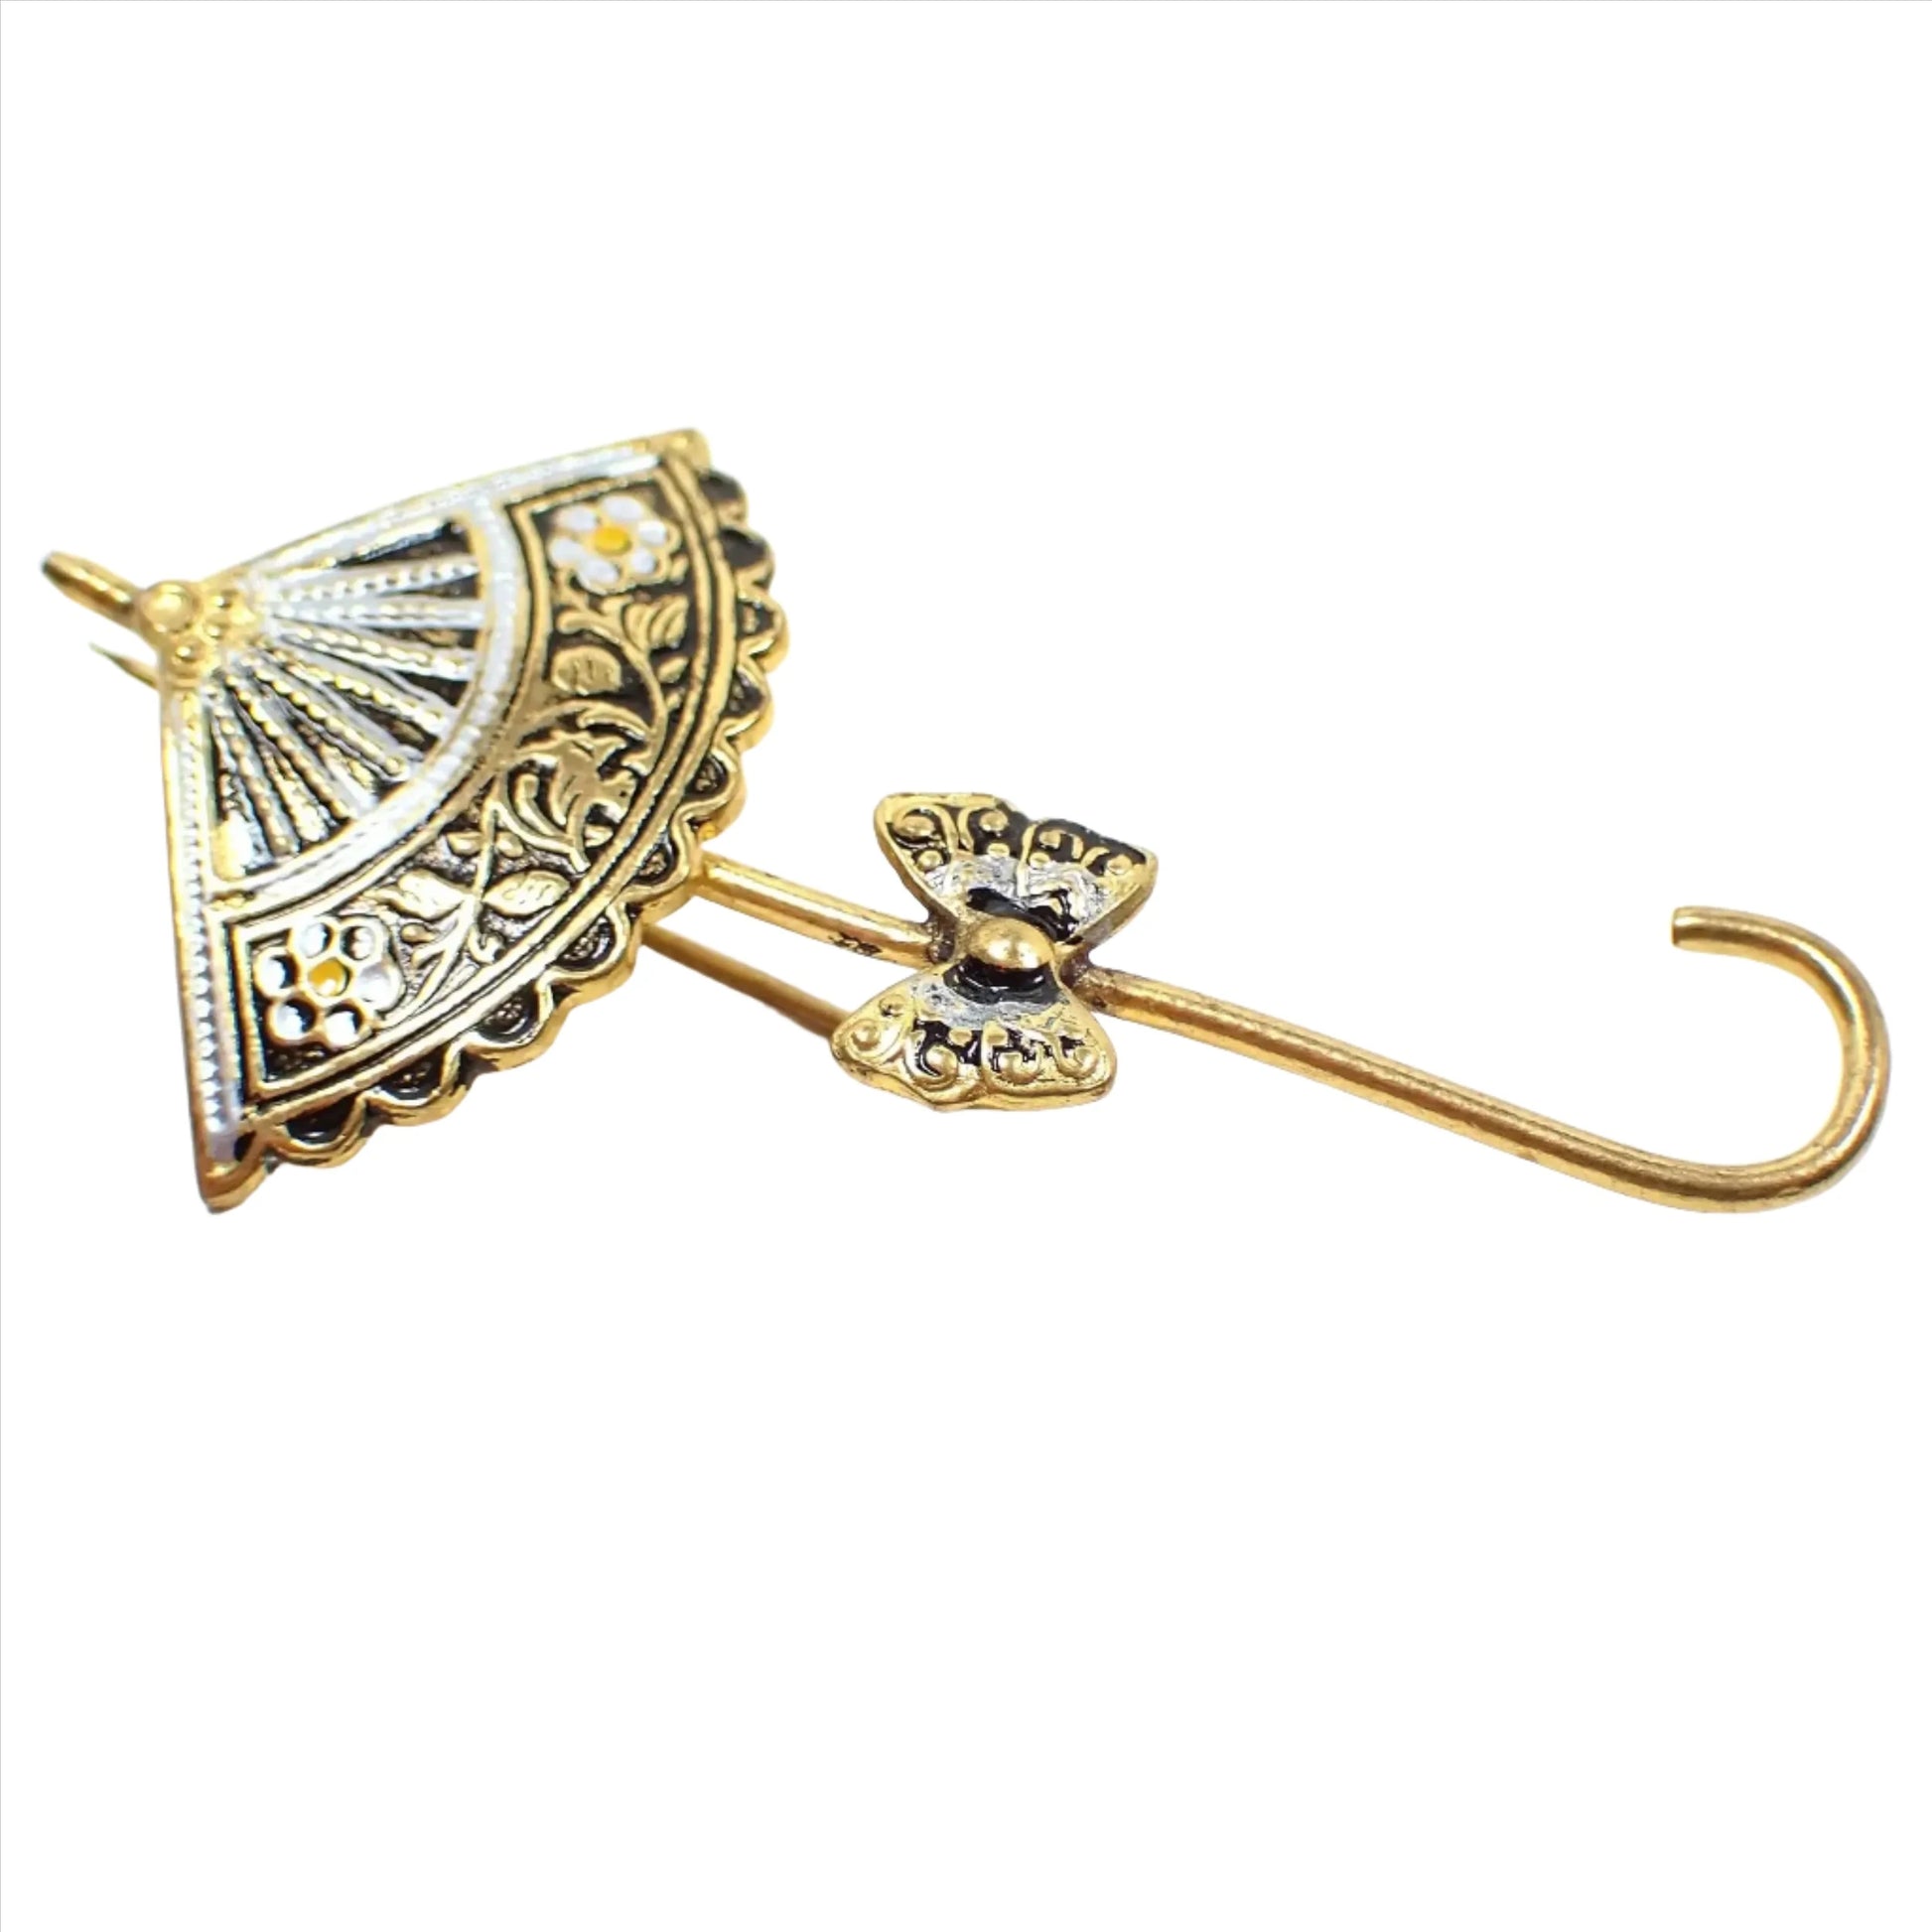 Enlarged view of the Mid Century vintage Damascene brooch pin. It is shaped like an umbrella with a butterfly on the upper handle area. The metal is gold tone plated in color and it has a gold tone, metallic silver painted, and black painted Damascene style design.